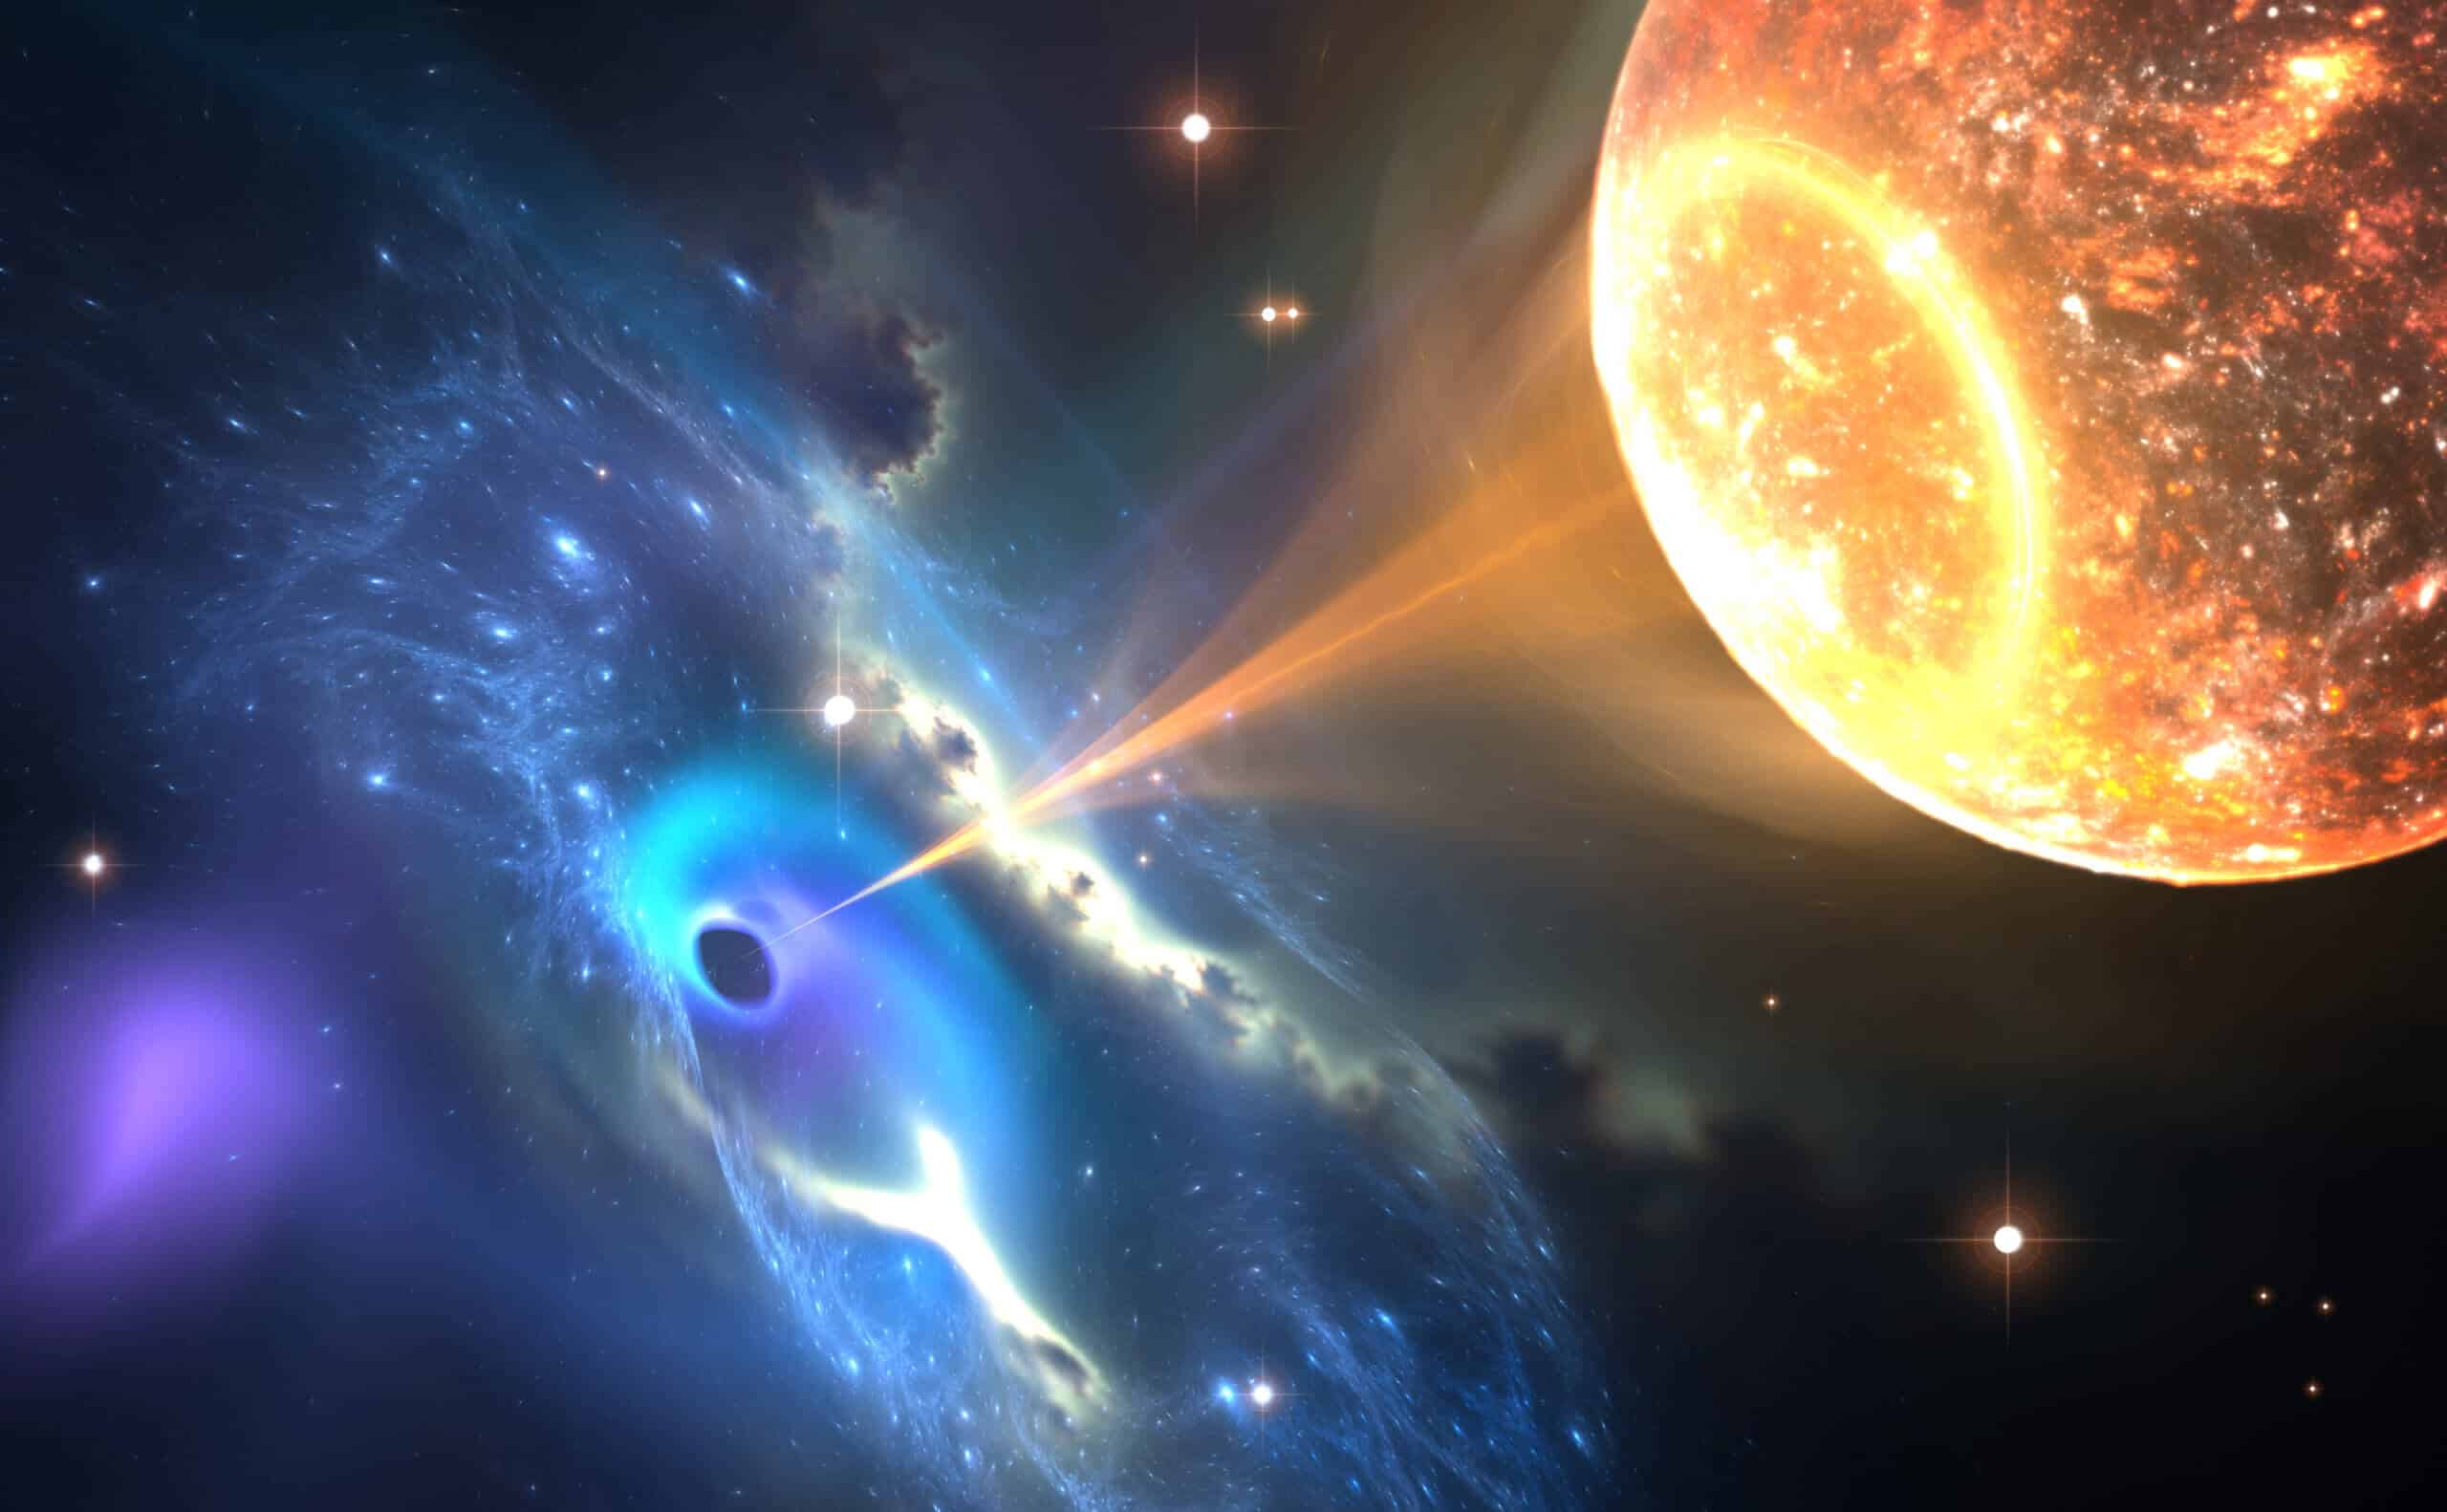 A black hole swallows its companion star. Illustration: shutterstock